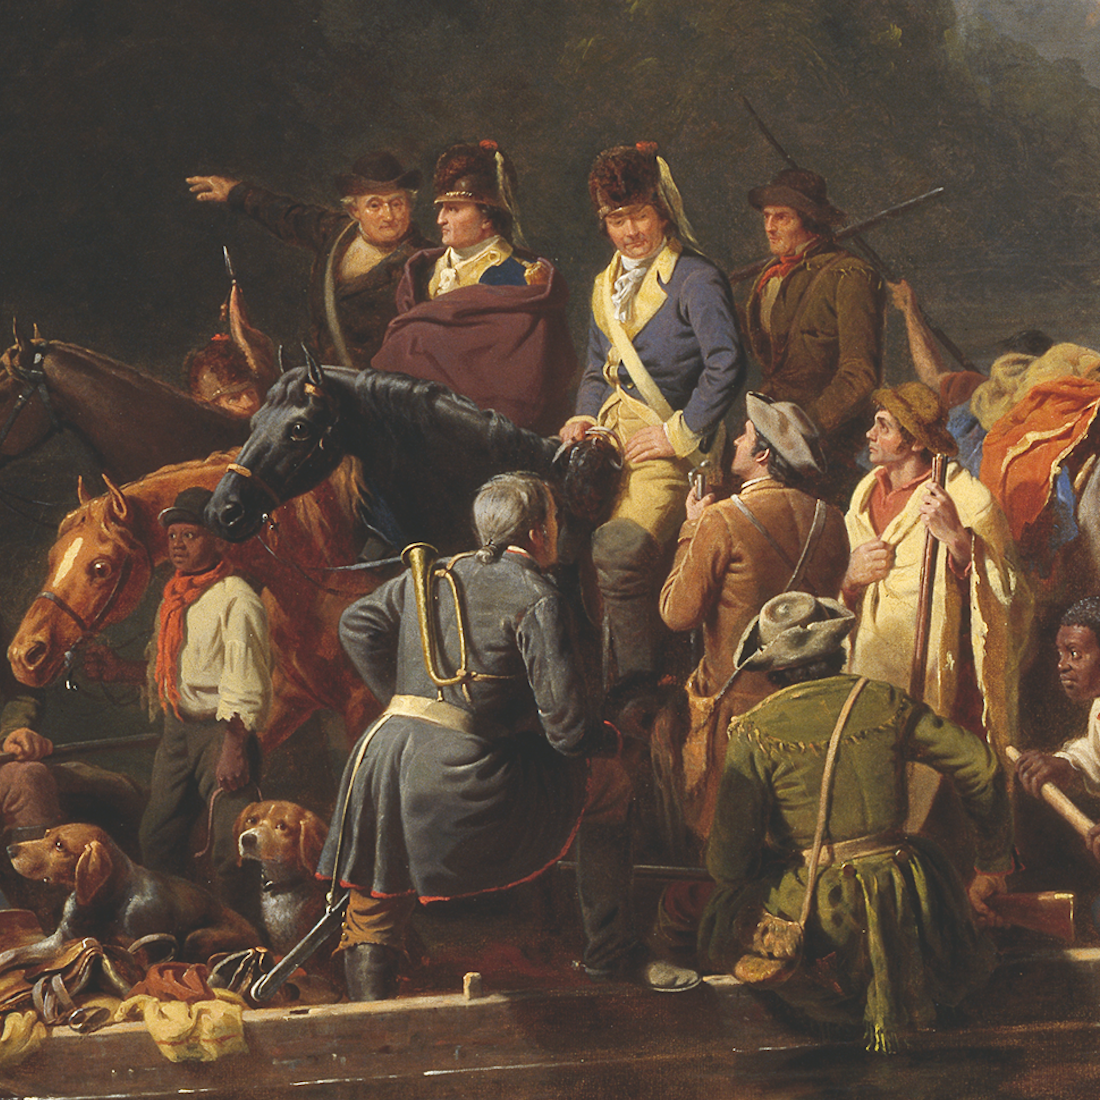 Francis Marion is wrapped in a cloak while crossing a South Carolina river in this nineteenth-century painting.